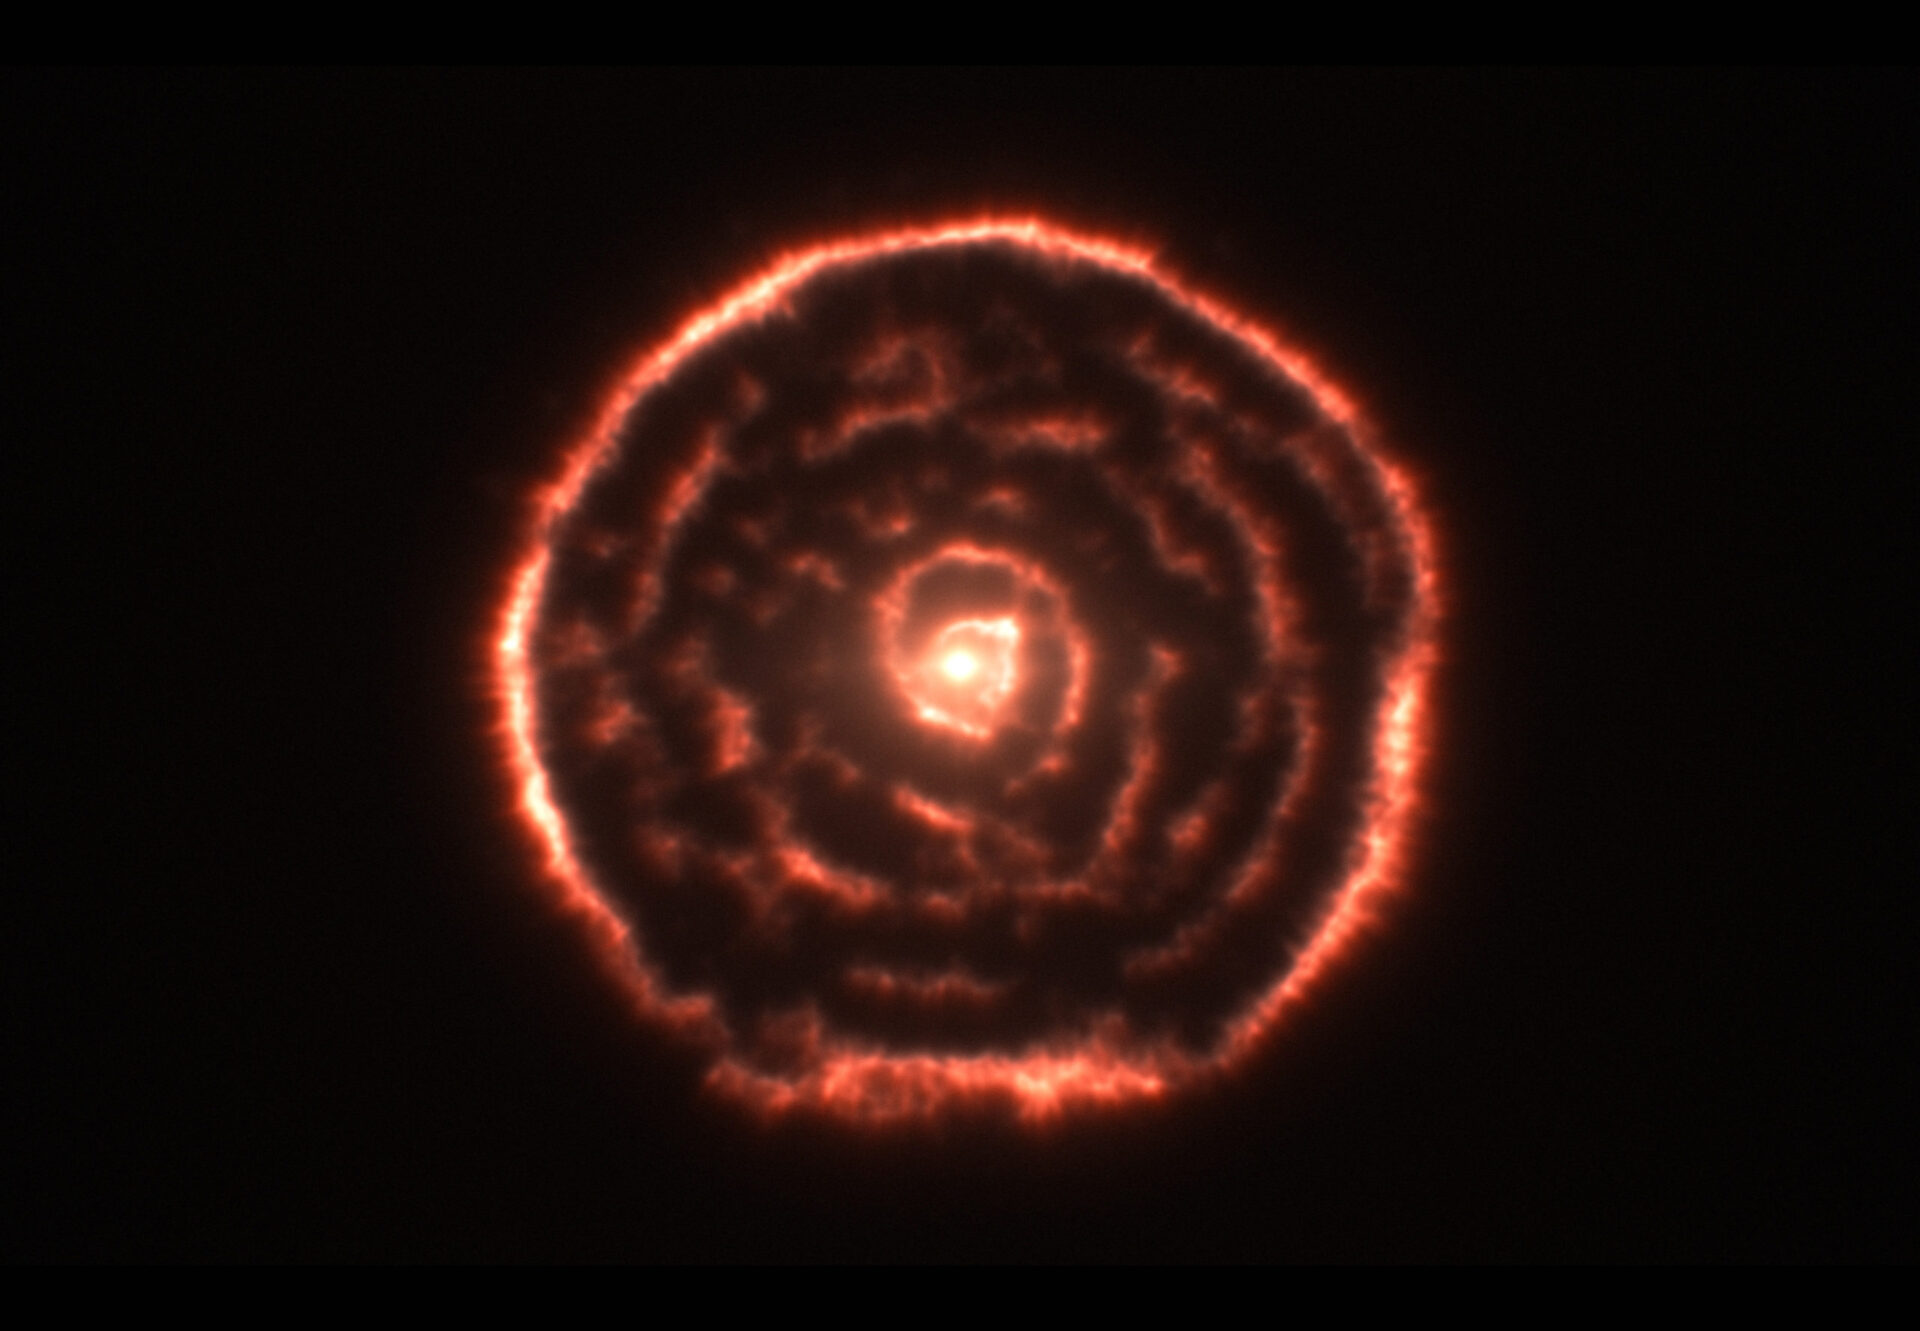 Surprising spiral structure in the gas around the red giant star R Sculptoris